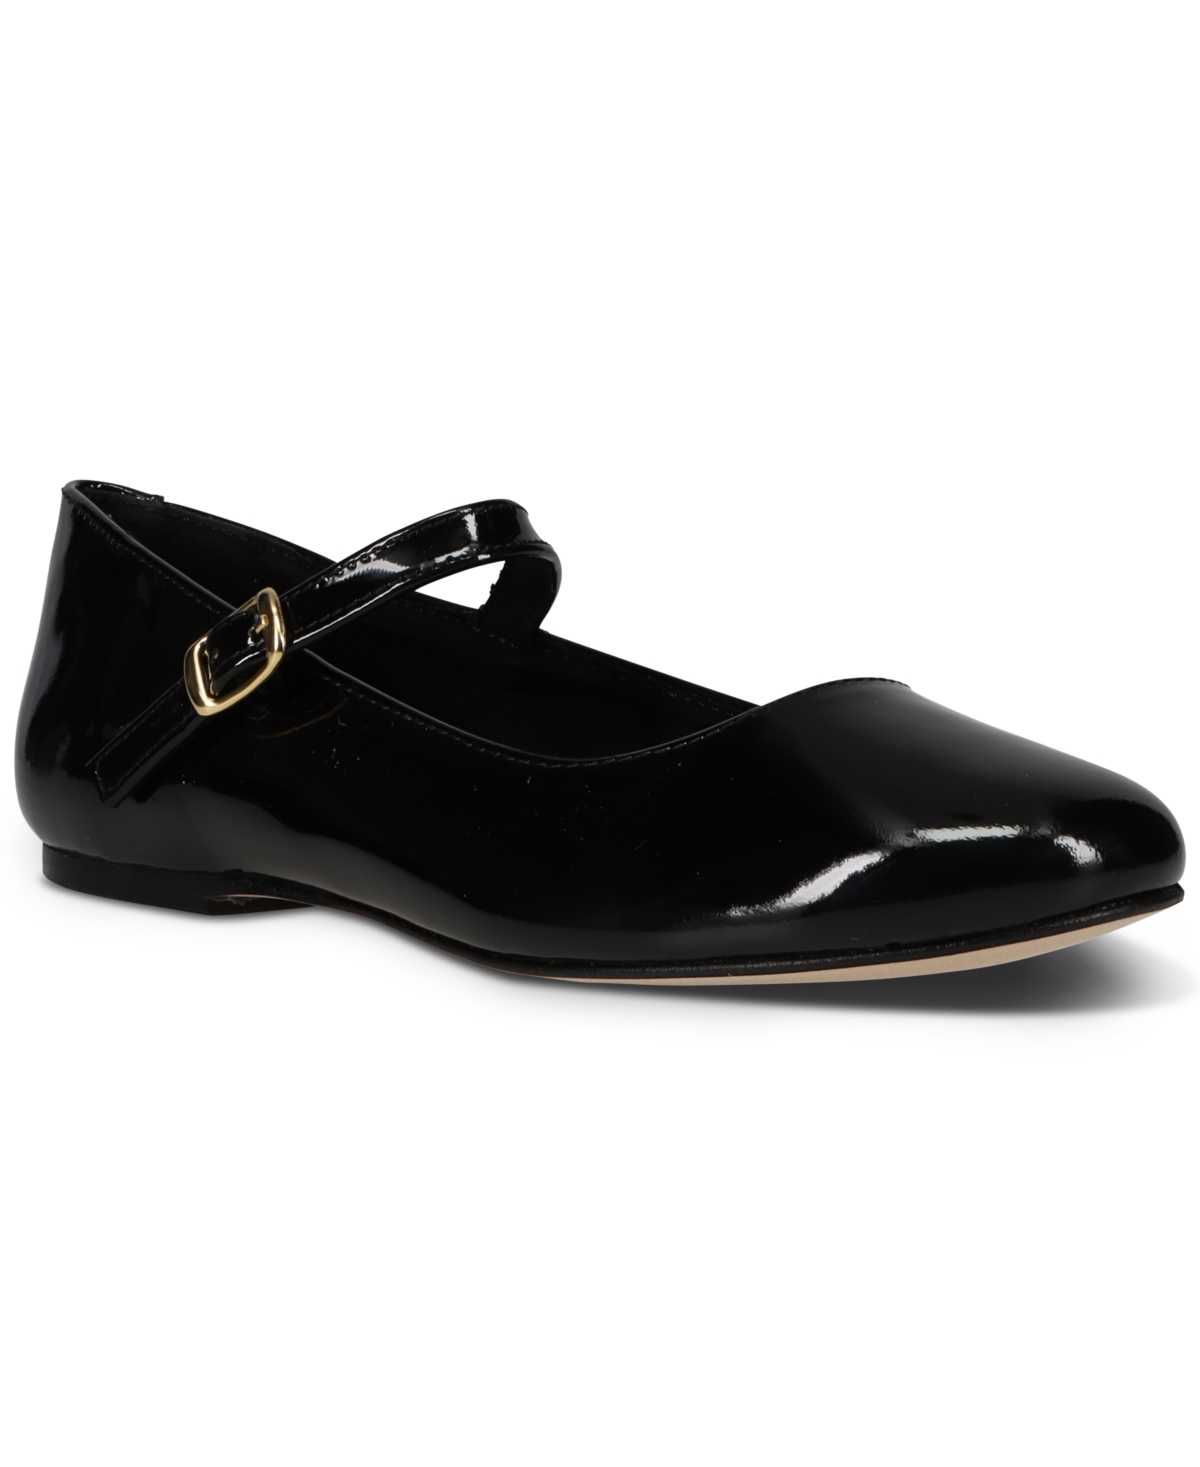 Polo Ralph Lauren Babies' Little Girl's & Girl's Kinslee Patent Leather Mary Jane Flats In Black